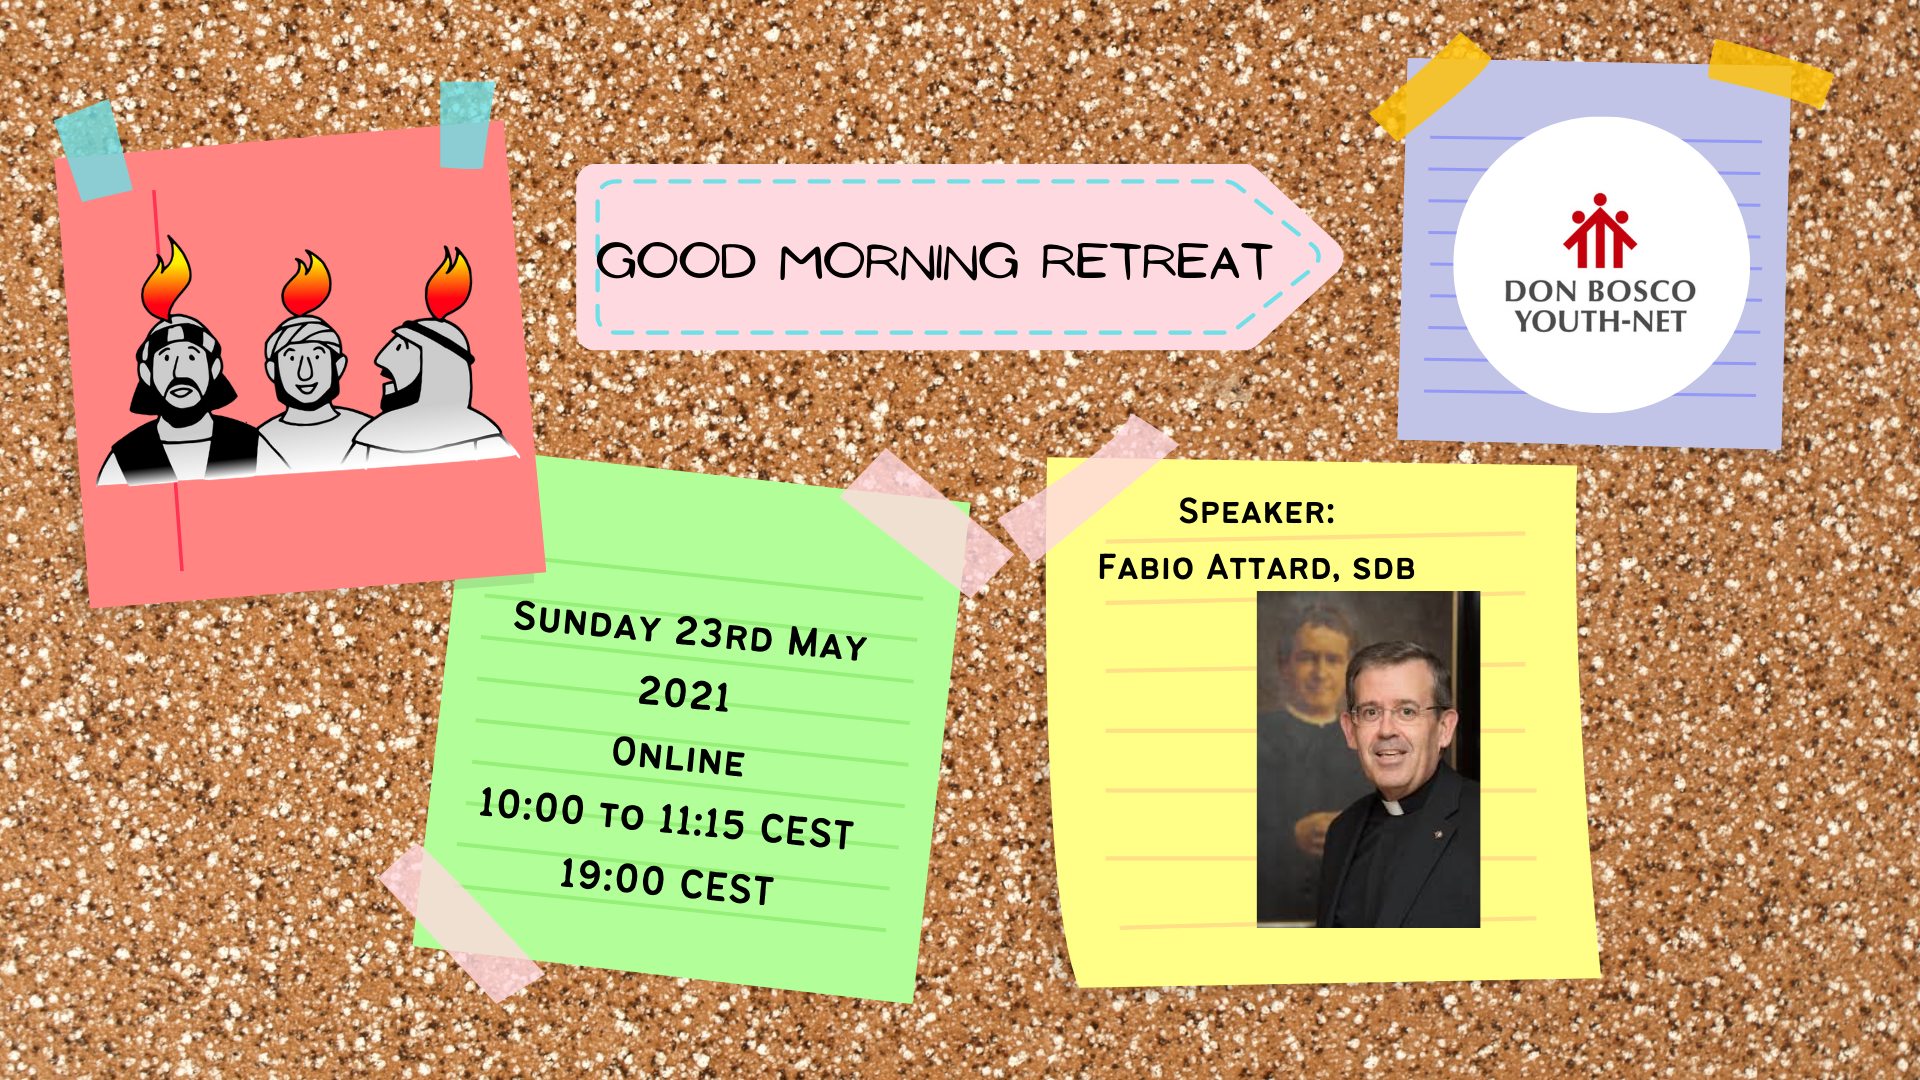 Join Don Bosco Youth-Net for a 'Good Morning' retreat